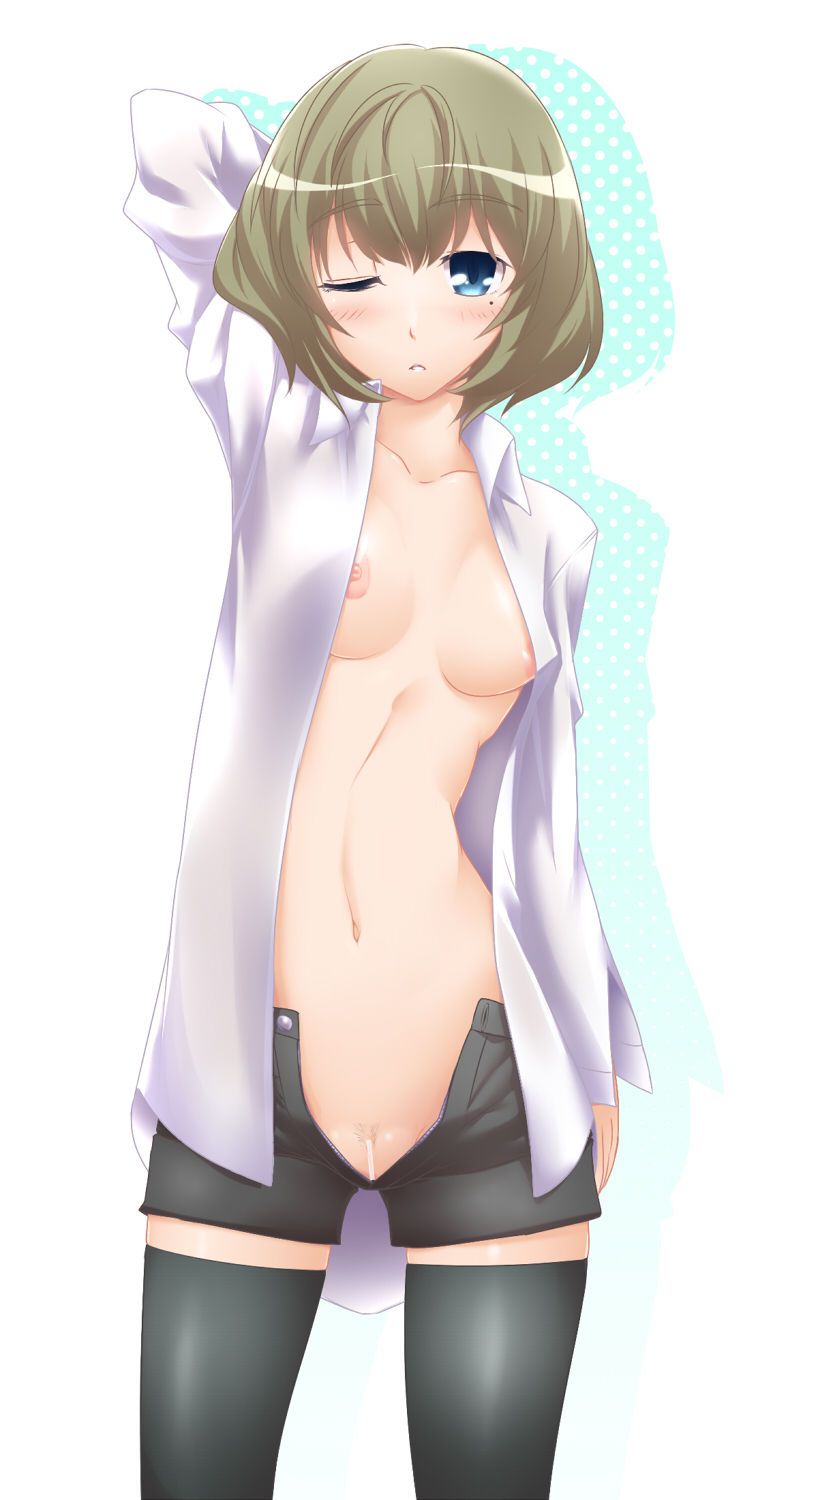 TAKAGAKI Kaede, and fusion of amorousness innocence and adult cock Bo was so. Let's go to the Onsen Hotel together now... Cinderella girls 2 hentai images 52